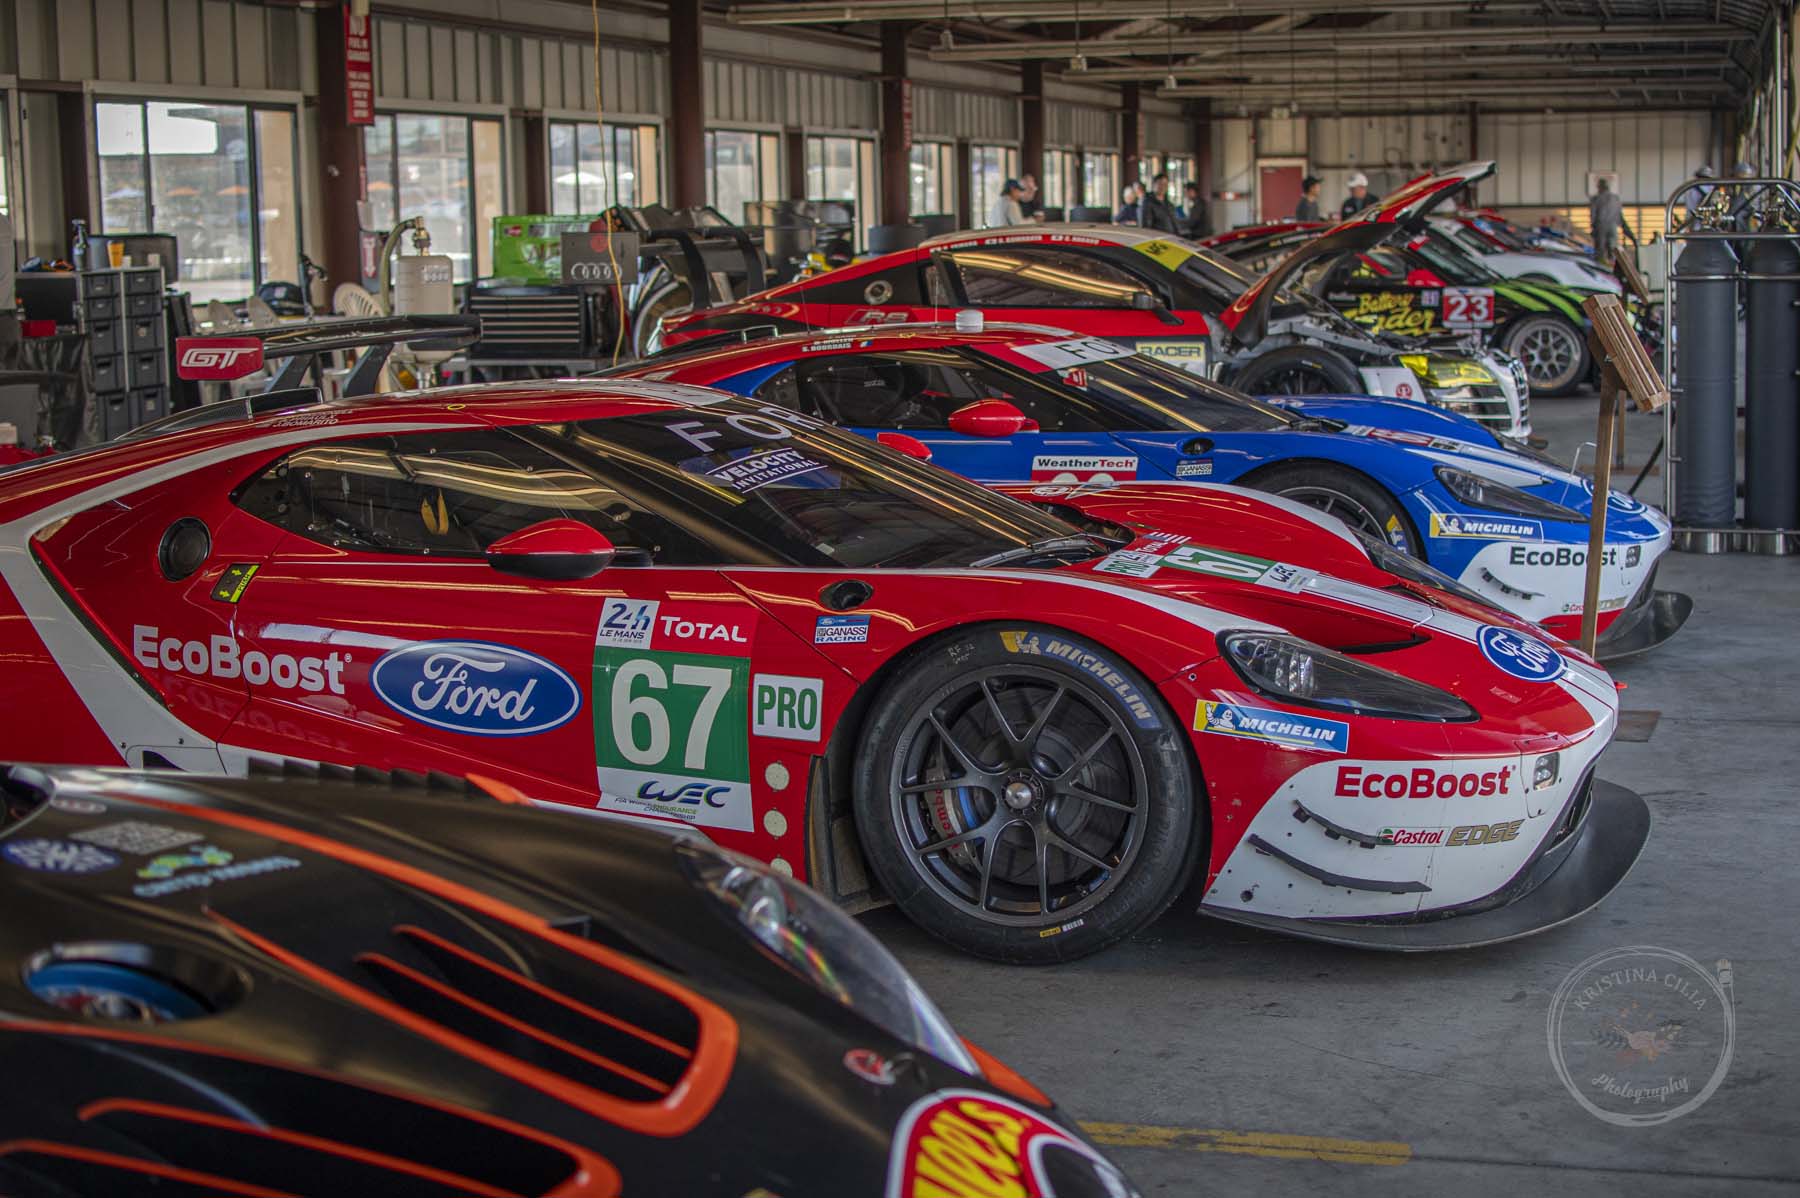 Group 9 racercars are lined up in a garage at Sonoma Raceway during Velocity Invitational